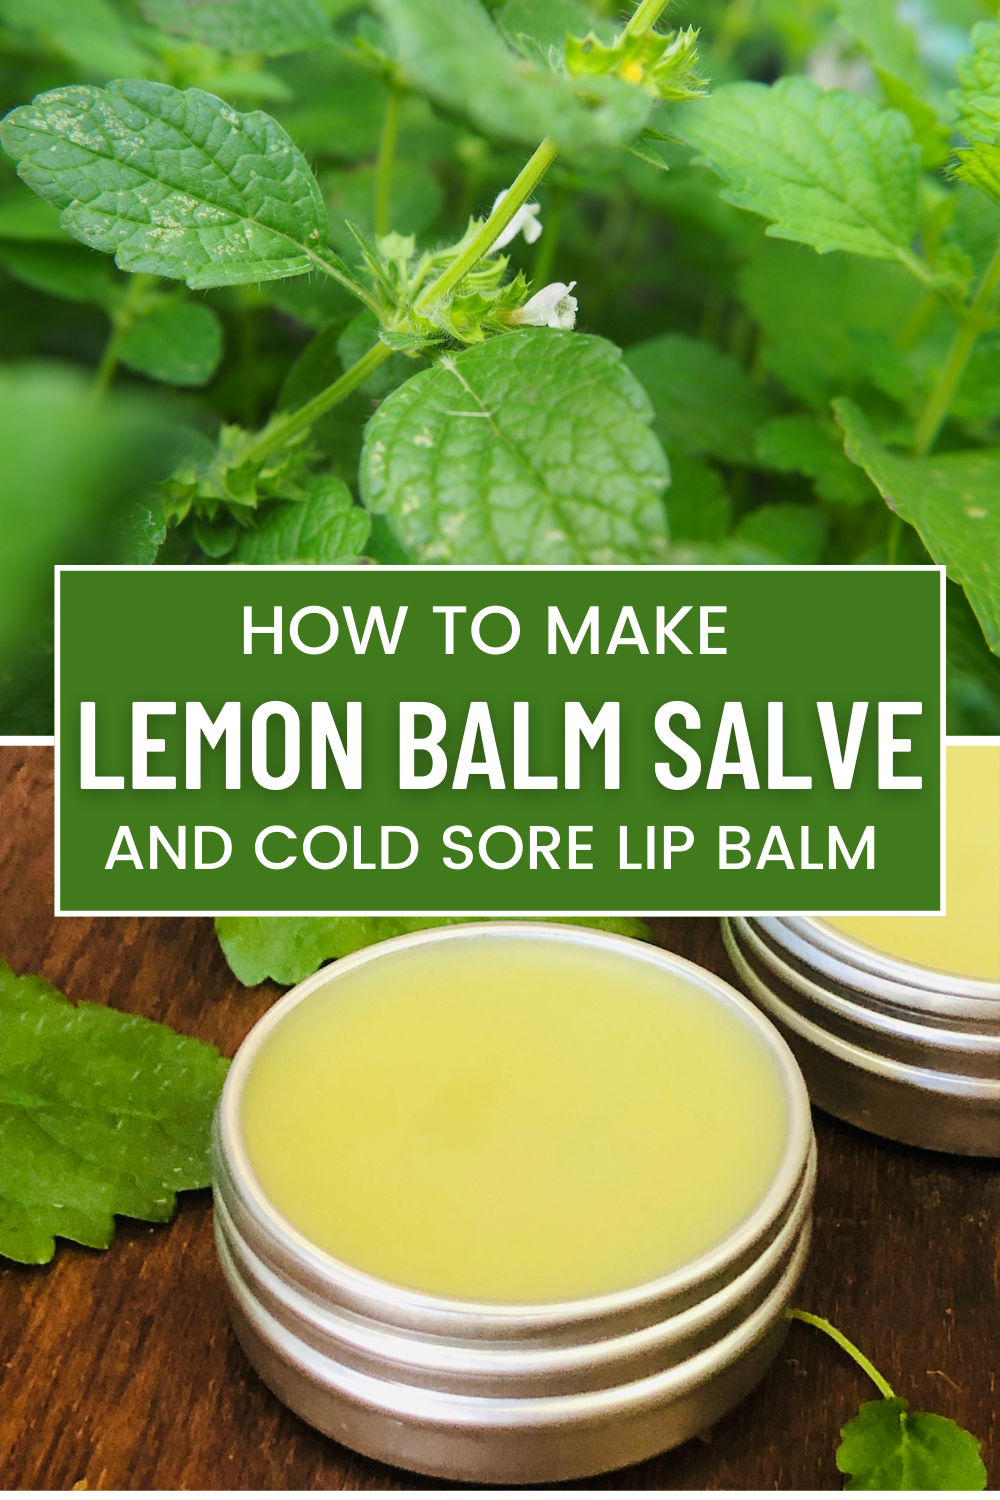 Lemon Balm is such a powerful herb - it's antiviral and serves to support healthy skin and help alleviate cold sores. Learn how to make Lemon Balm Salve in just a few easy steps!